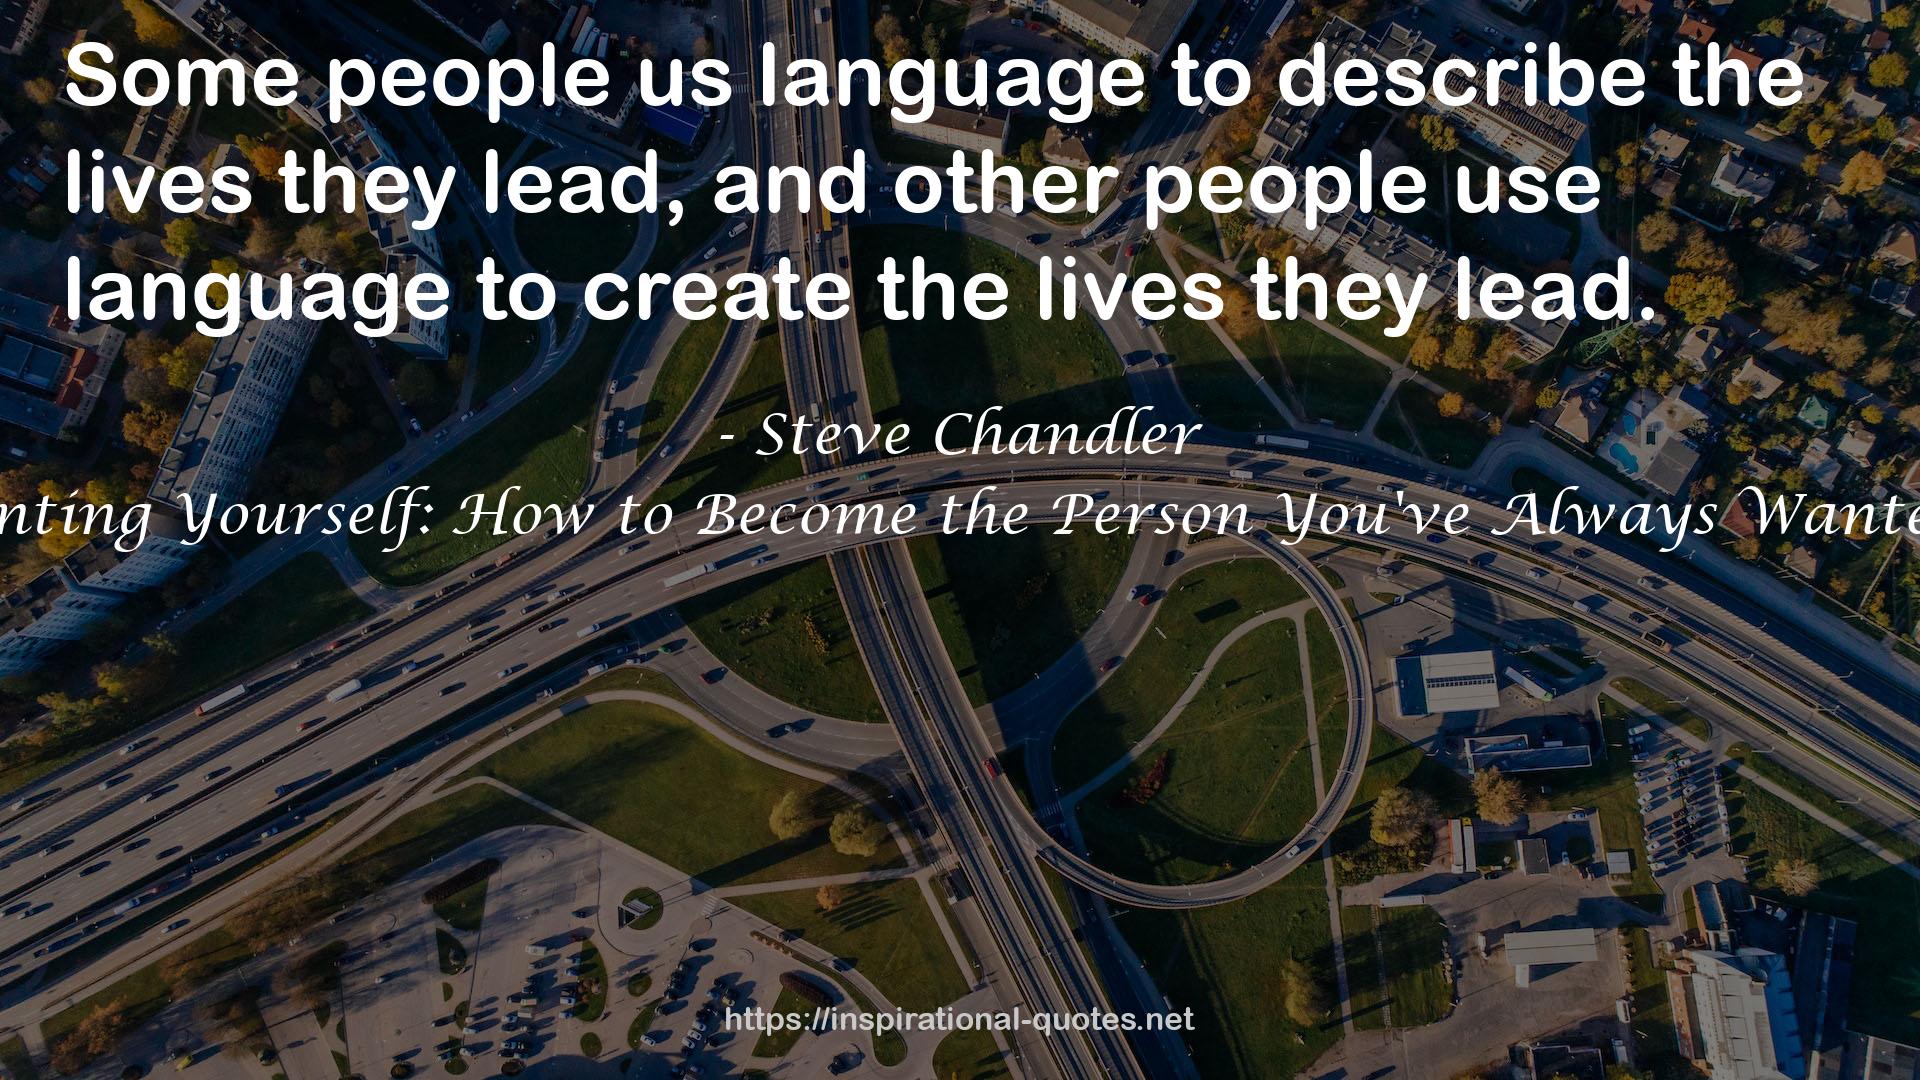 Steve Chandler QUOTES